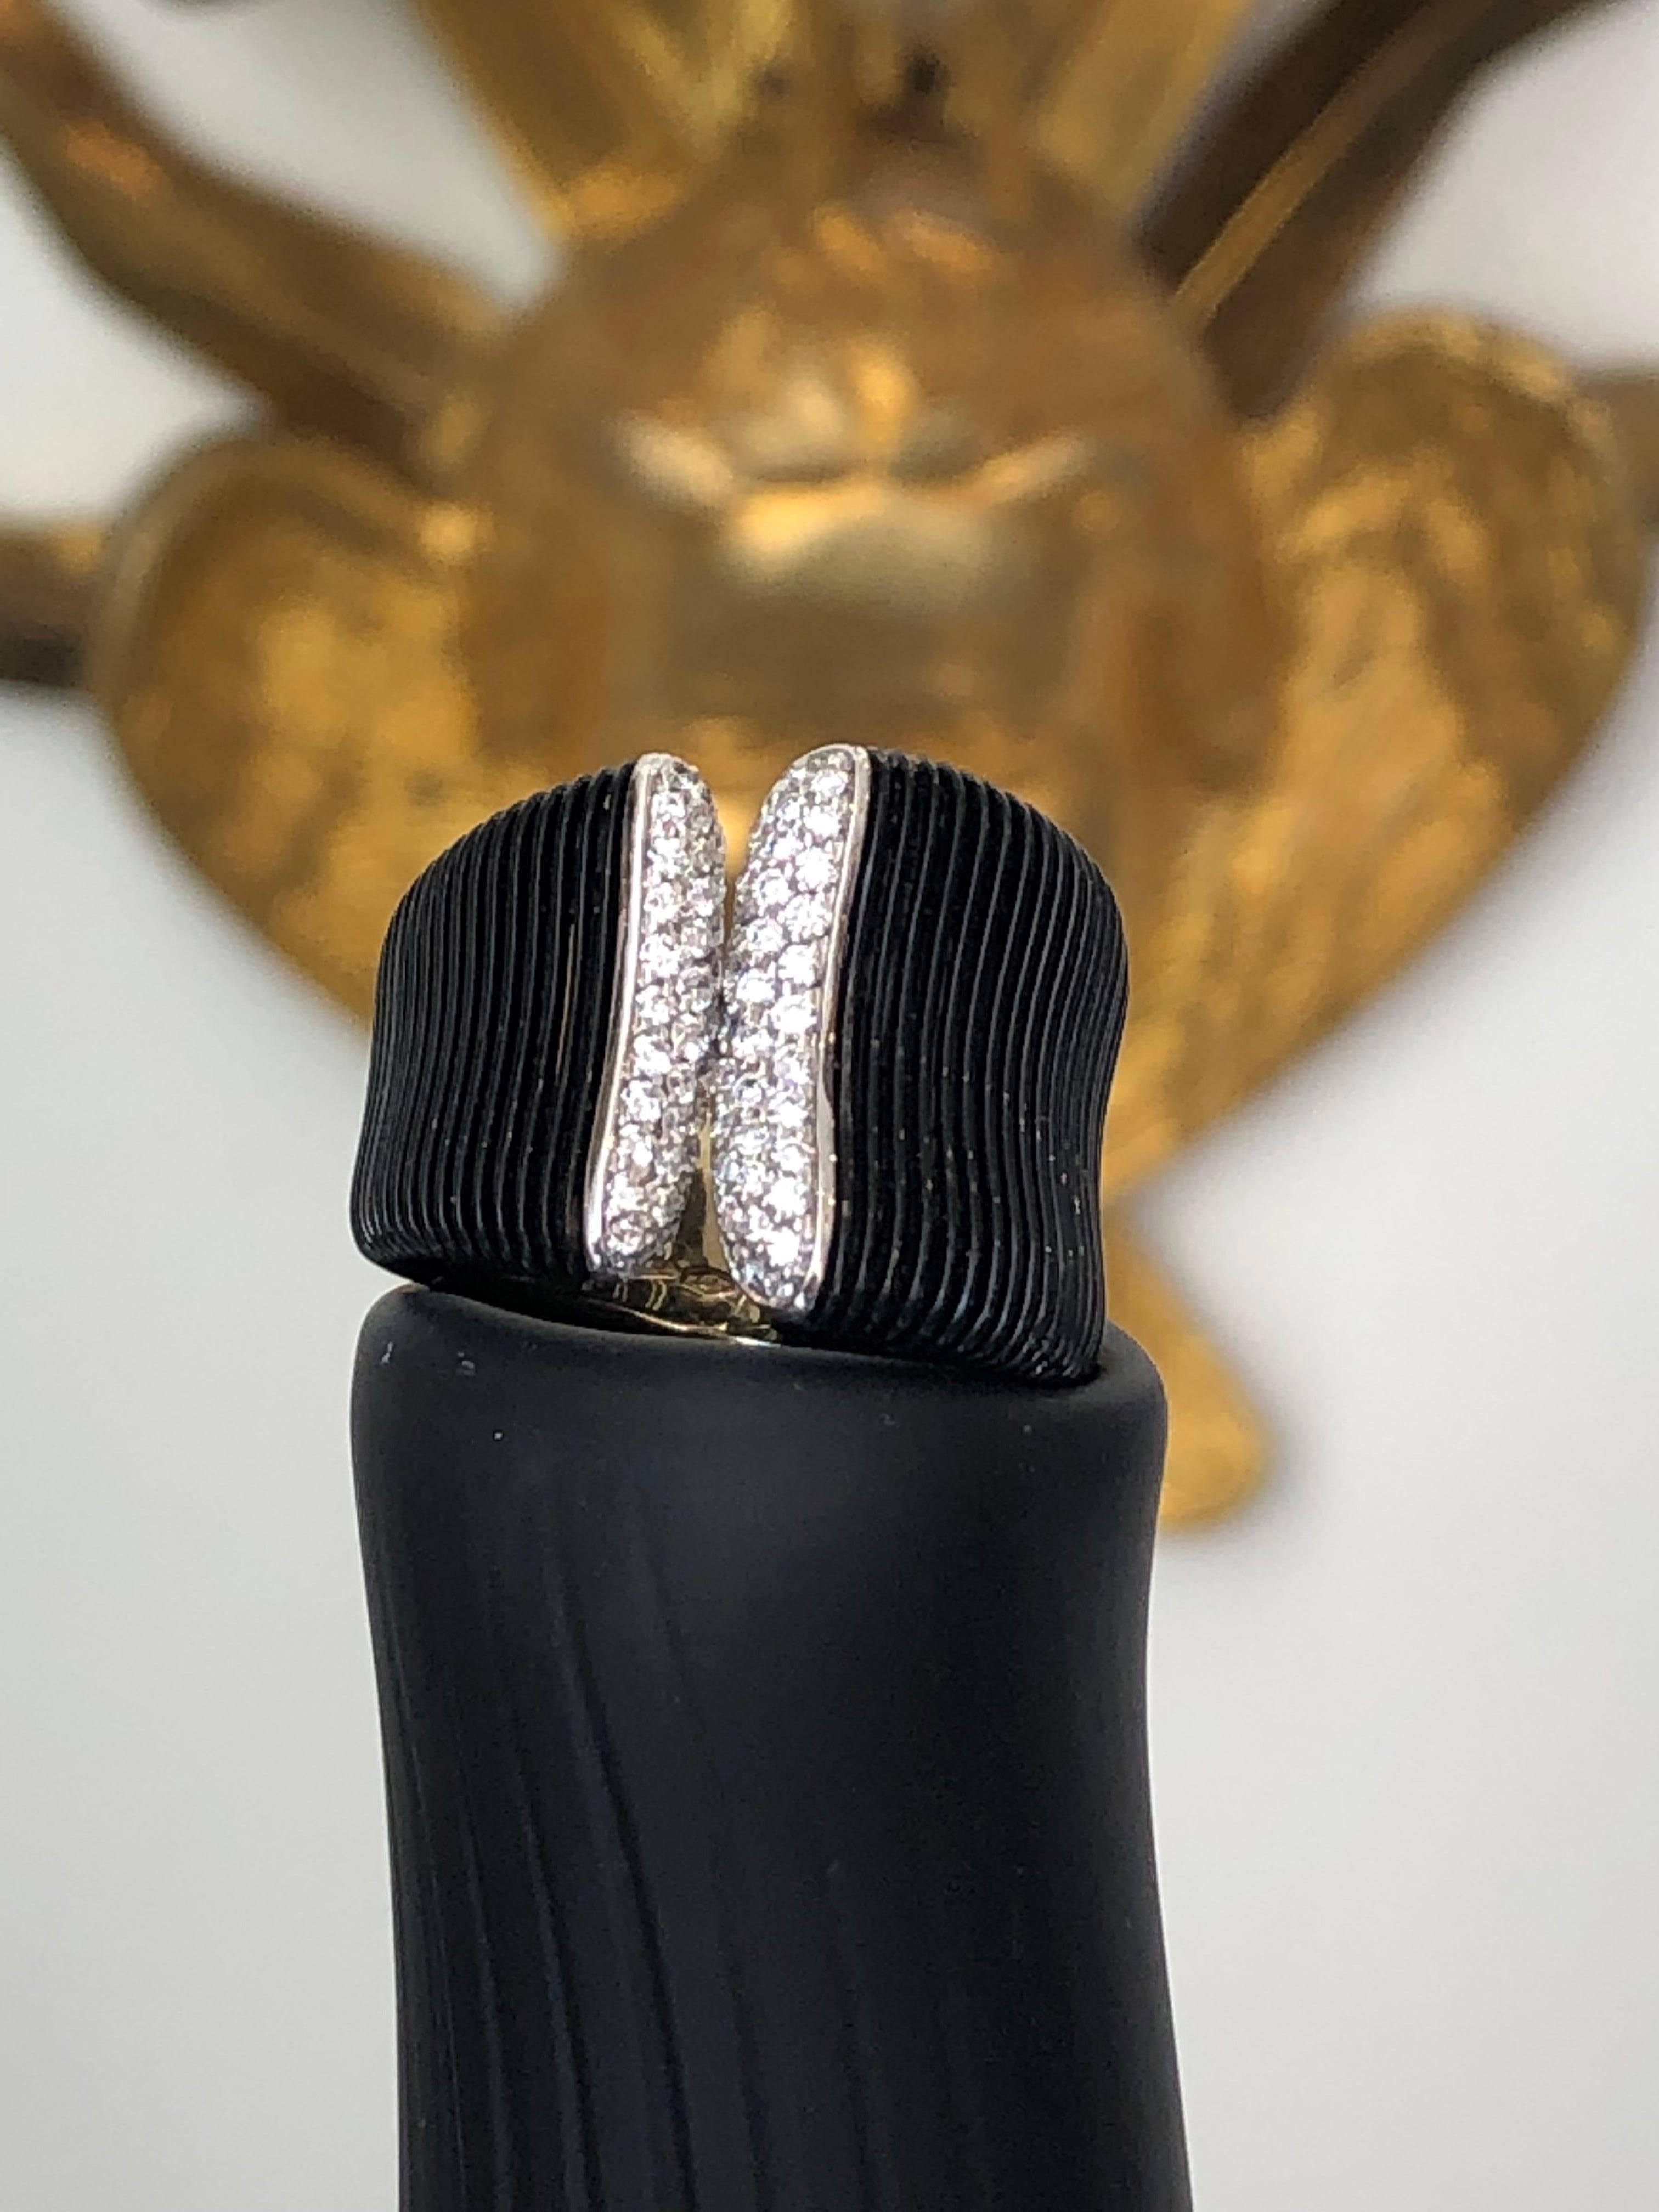 Black Gold and Diamond Band Ring containing .56 carats of Brilliant Round Cut Diamonds, all F-G color and VS clarity, set into black rhodium plated 18 karat White gold.  Rhodium is a precious metal that is in the family of platinum, that safeguards